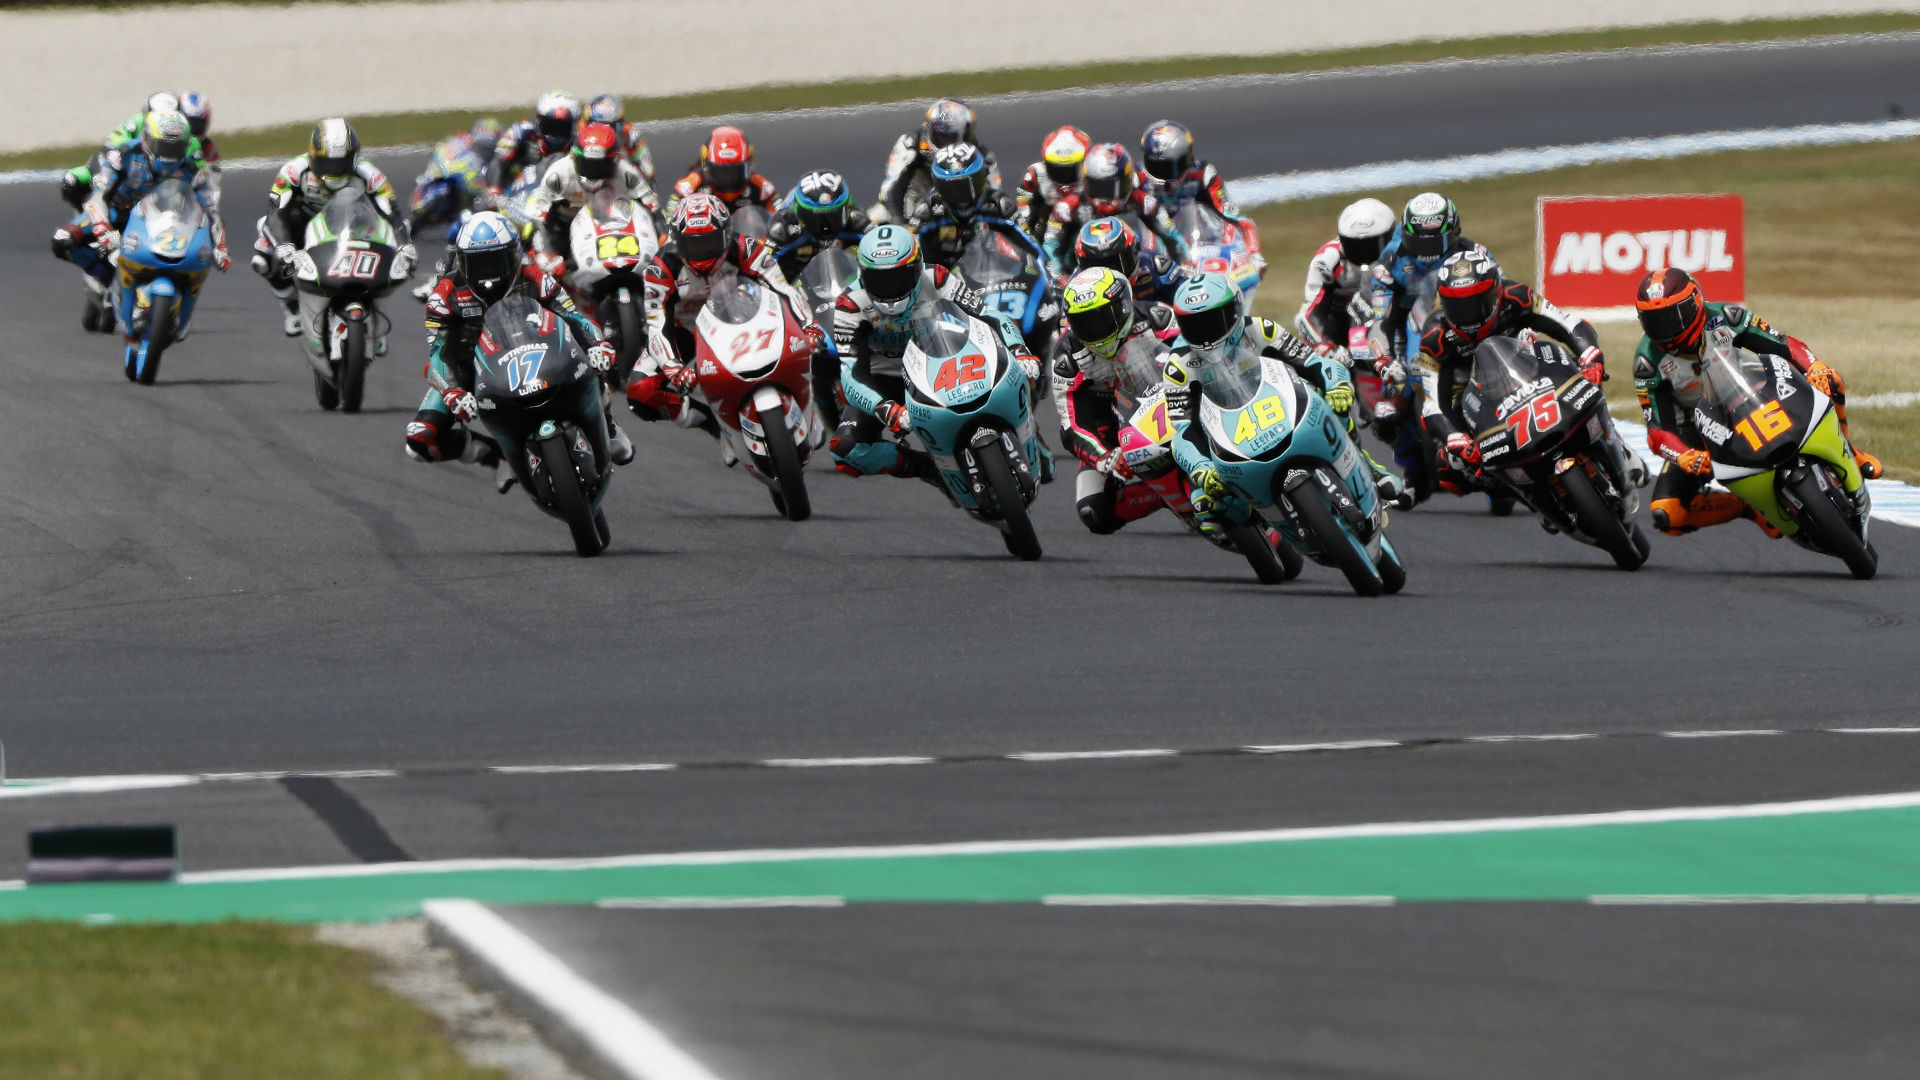 There will be no MotoGP races at Silverstone and Phillip Island this year, as the 2020 season continues to be affected by coronavirus.